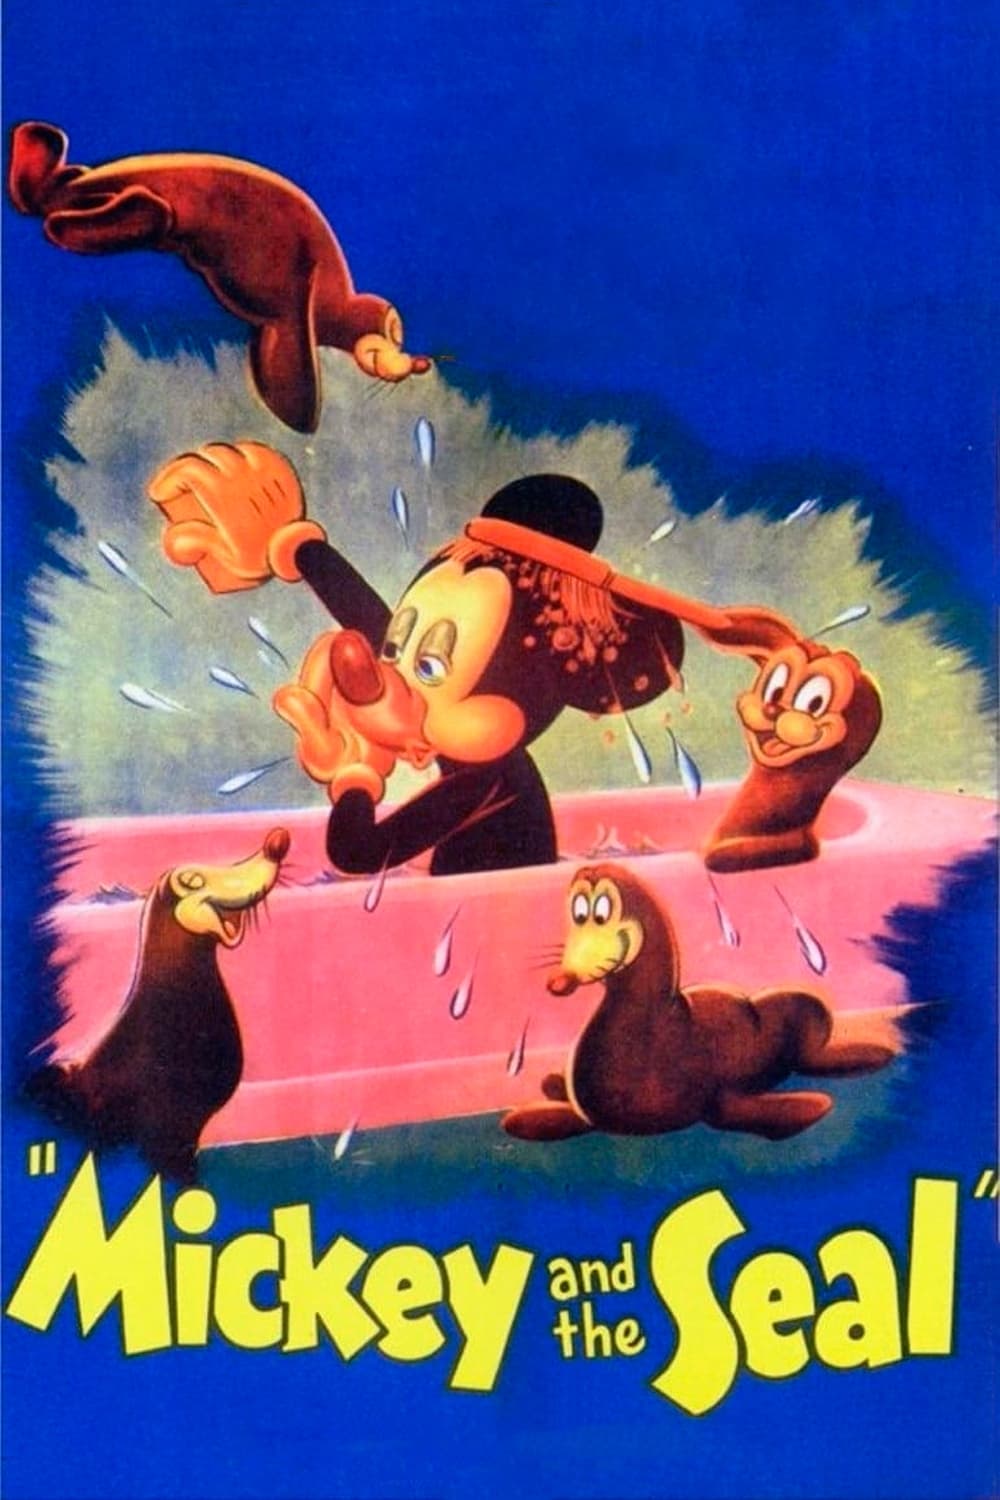 Mickey and the Seal (1948)